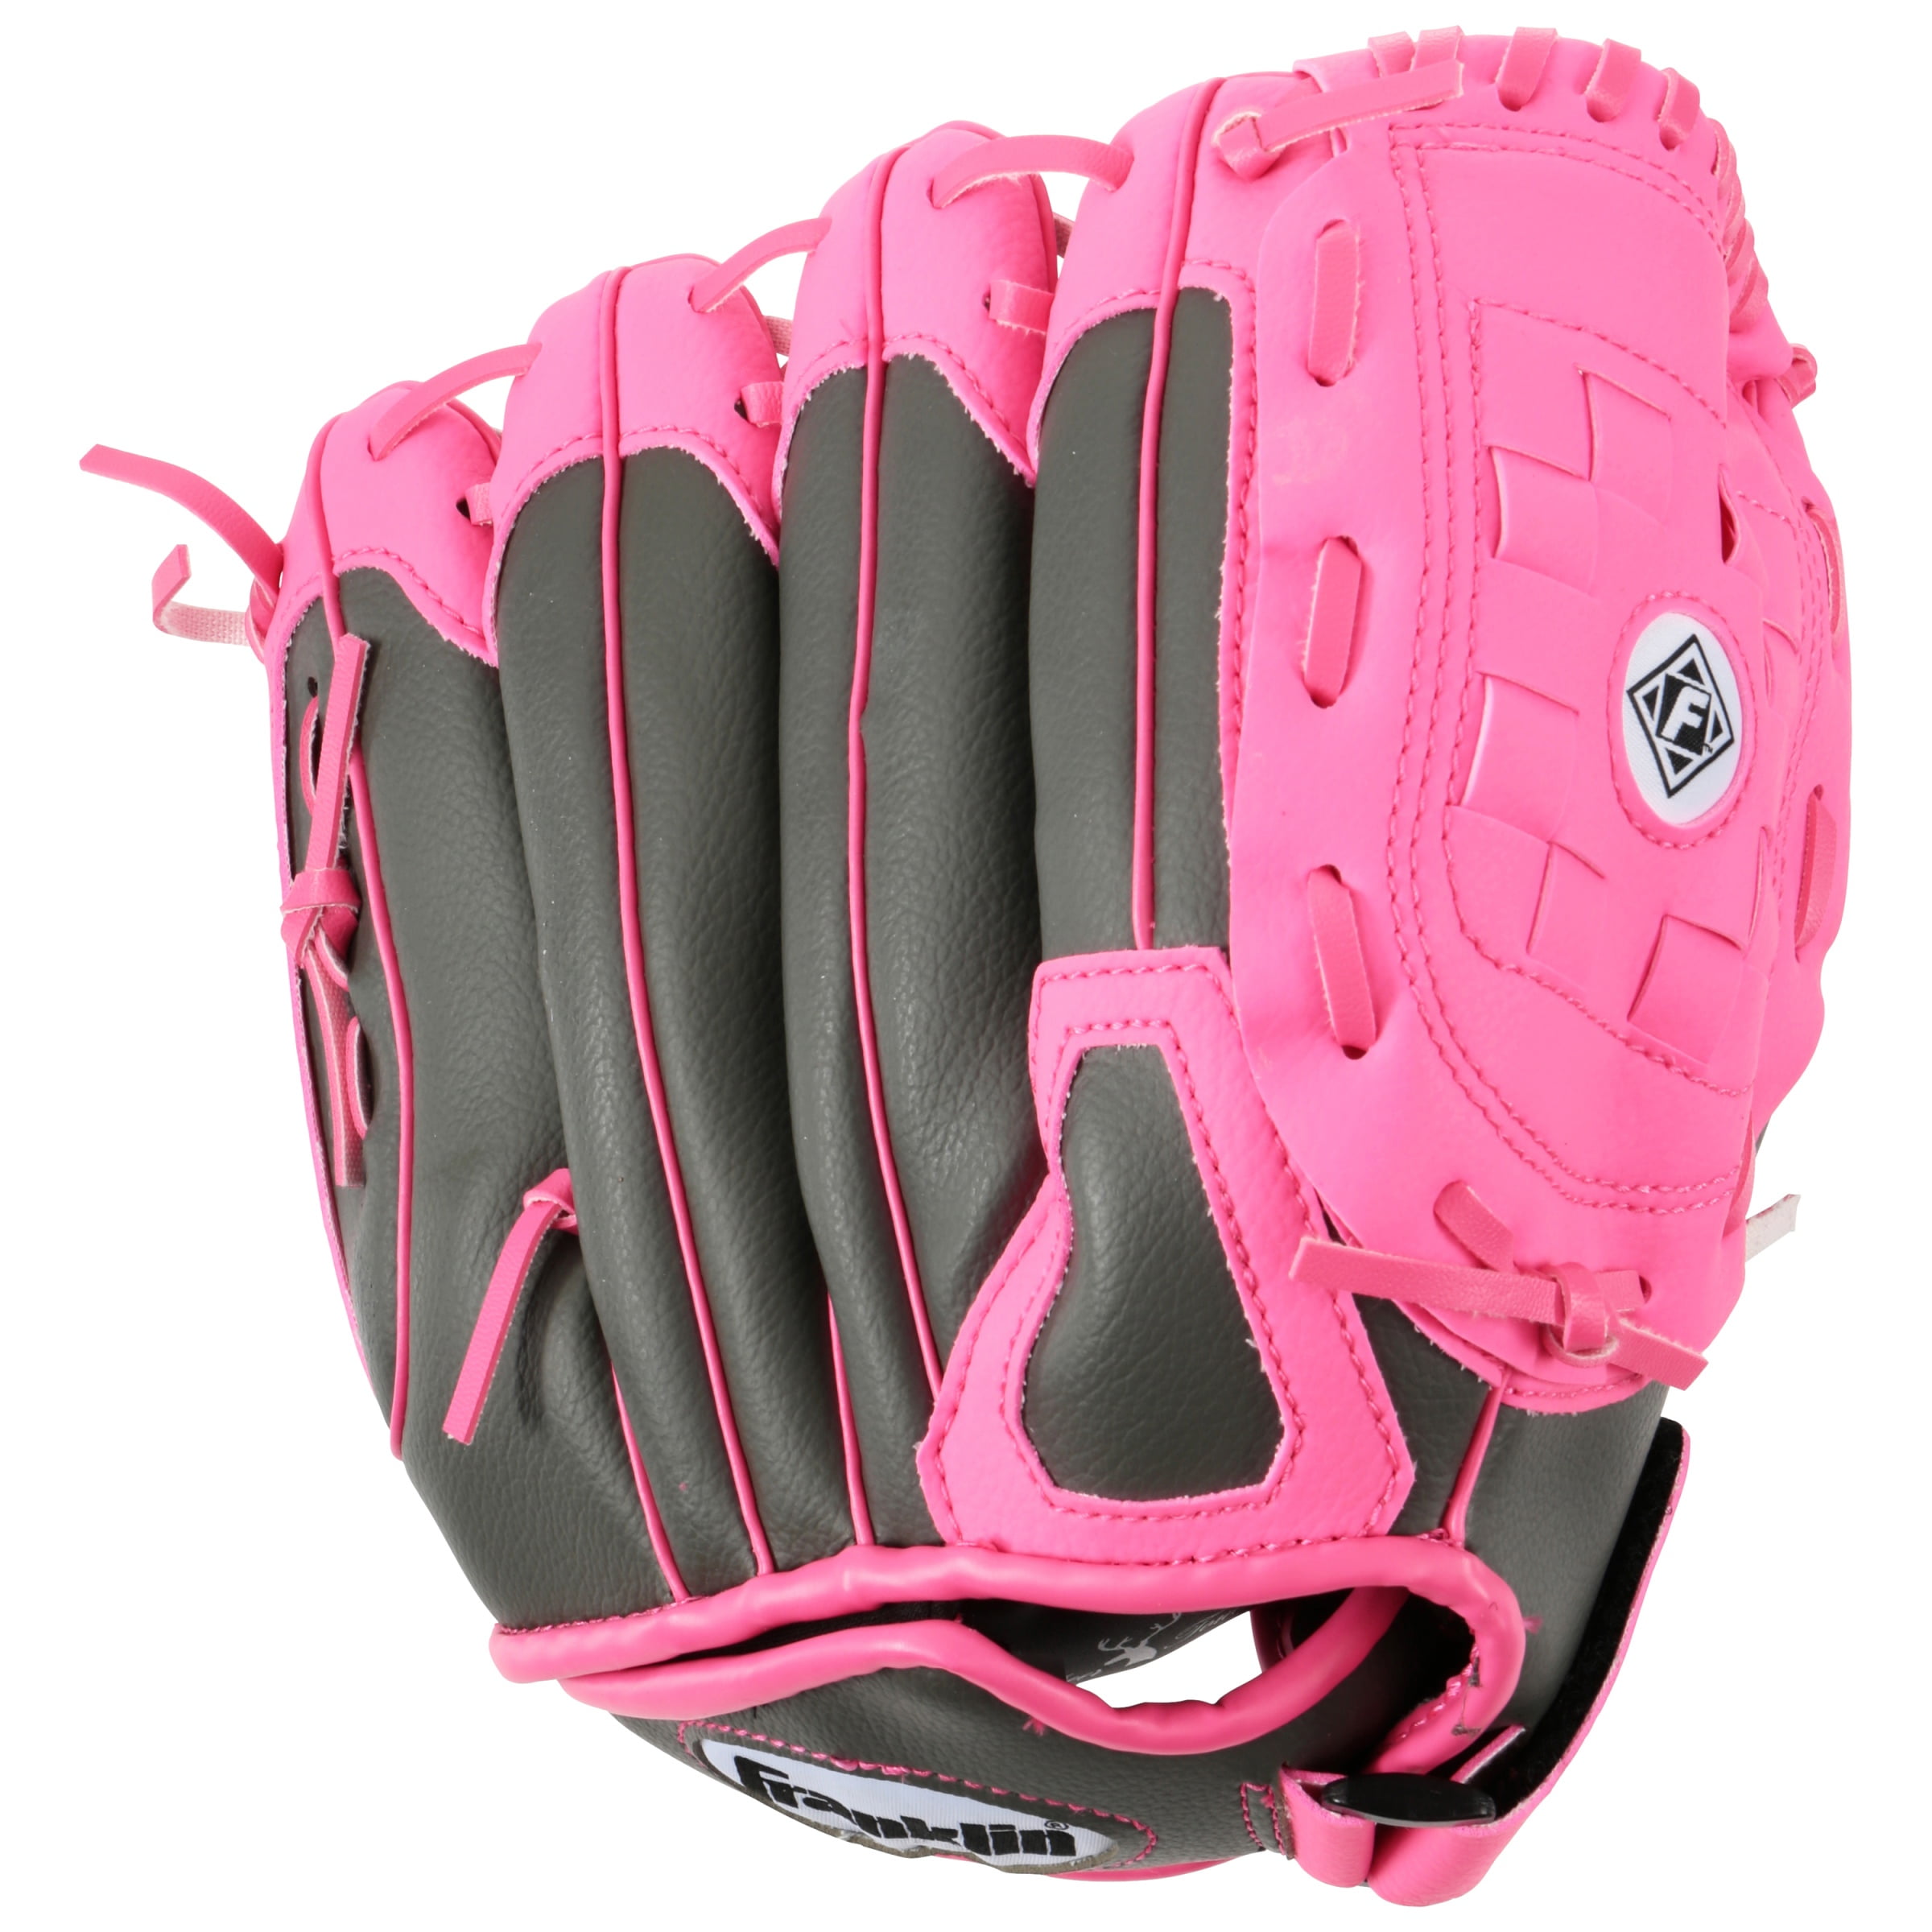 NEW Franklin Girls Tee Ball Fielding Glove Gray and Pink 10.5"  R-Hand Thrower 